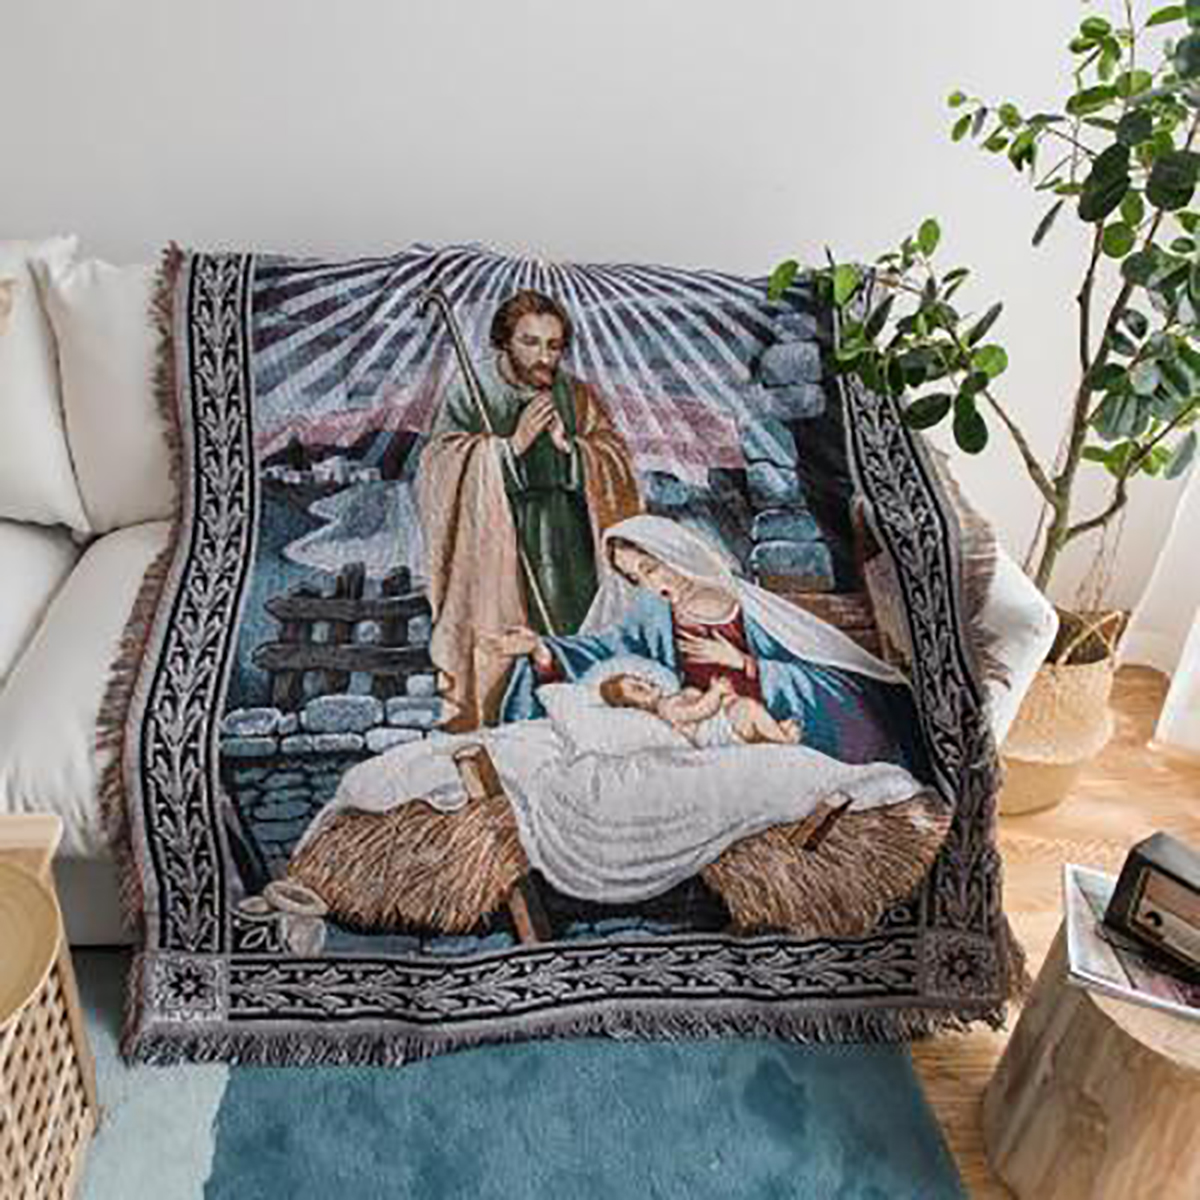 Folding-Decorative-Blanket-Knit-Tapestry-Prayer-Carpet-Middle-East-Sofa-Towel-for-Home-Textiles-1761320-5